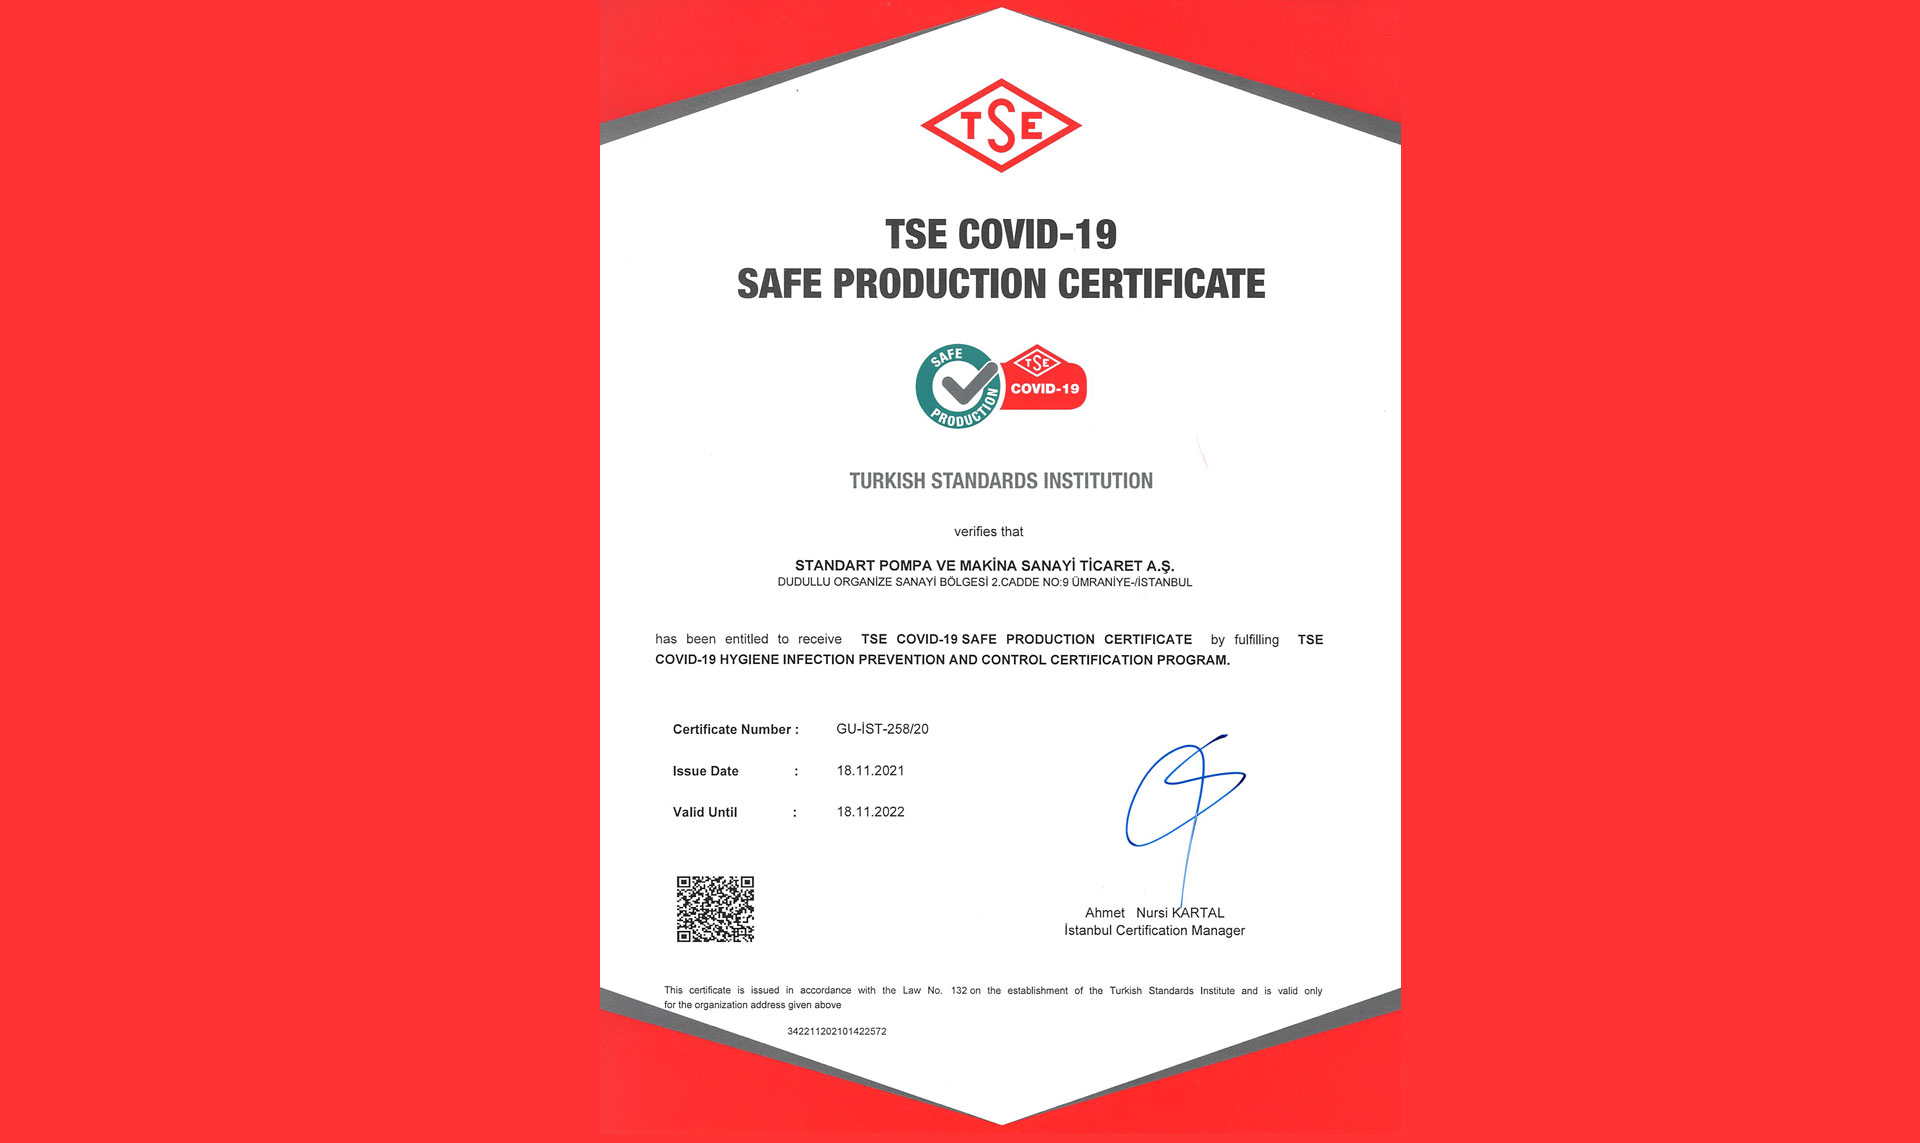 We have renewed our Covid-19 Safe Production Certificate.